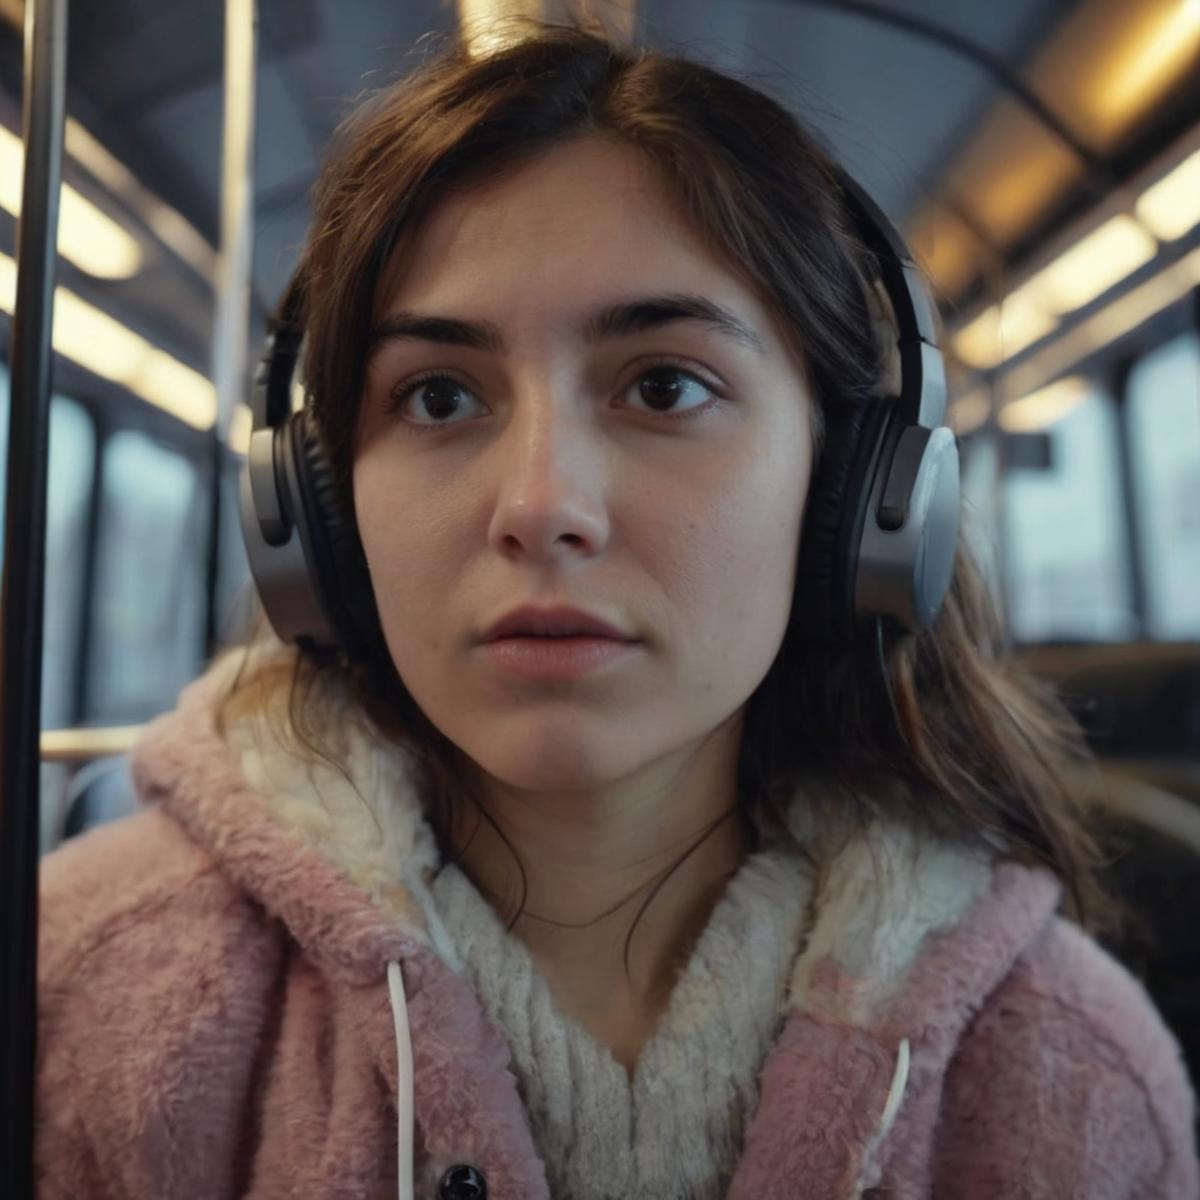 Woman with headphones on a bus, listening to music or watching a video.